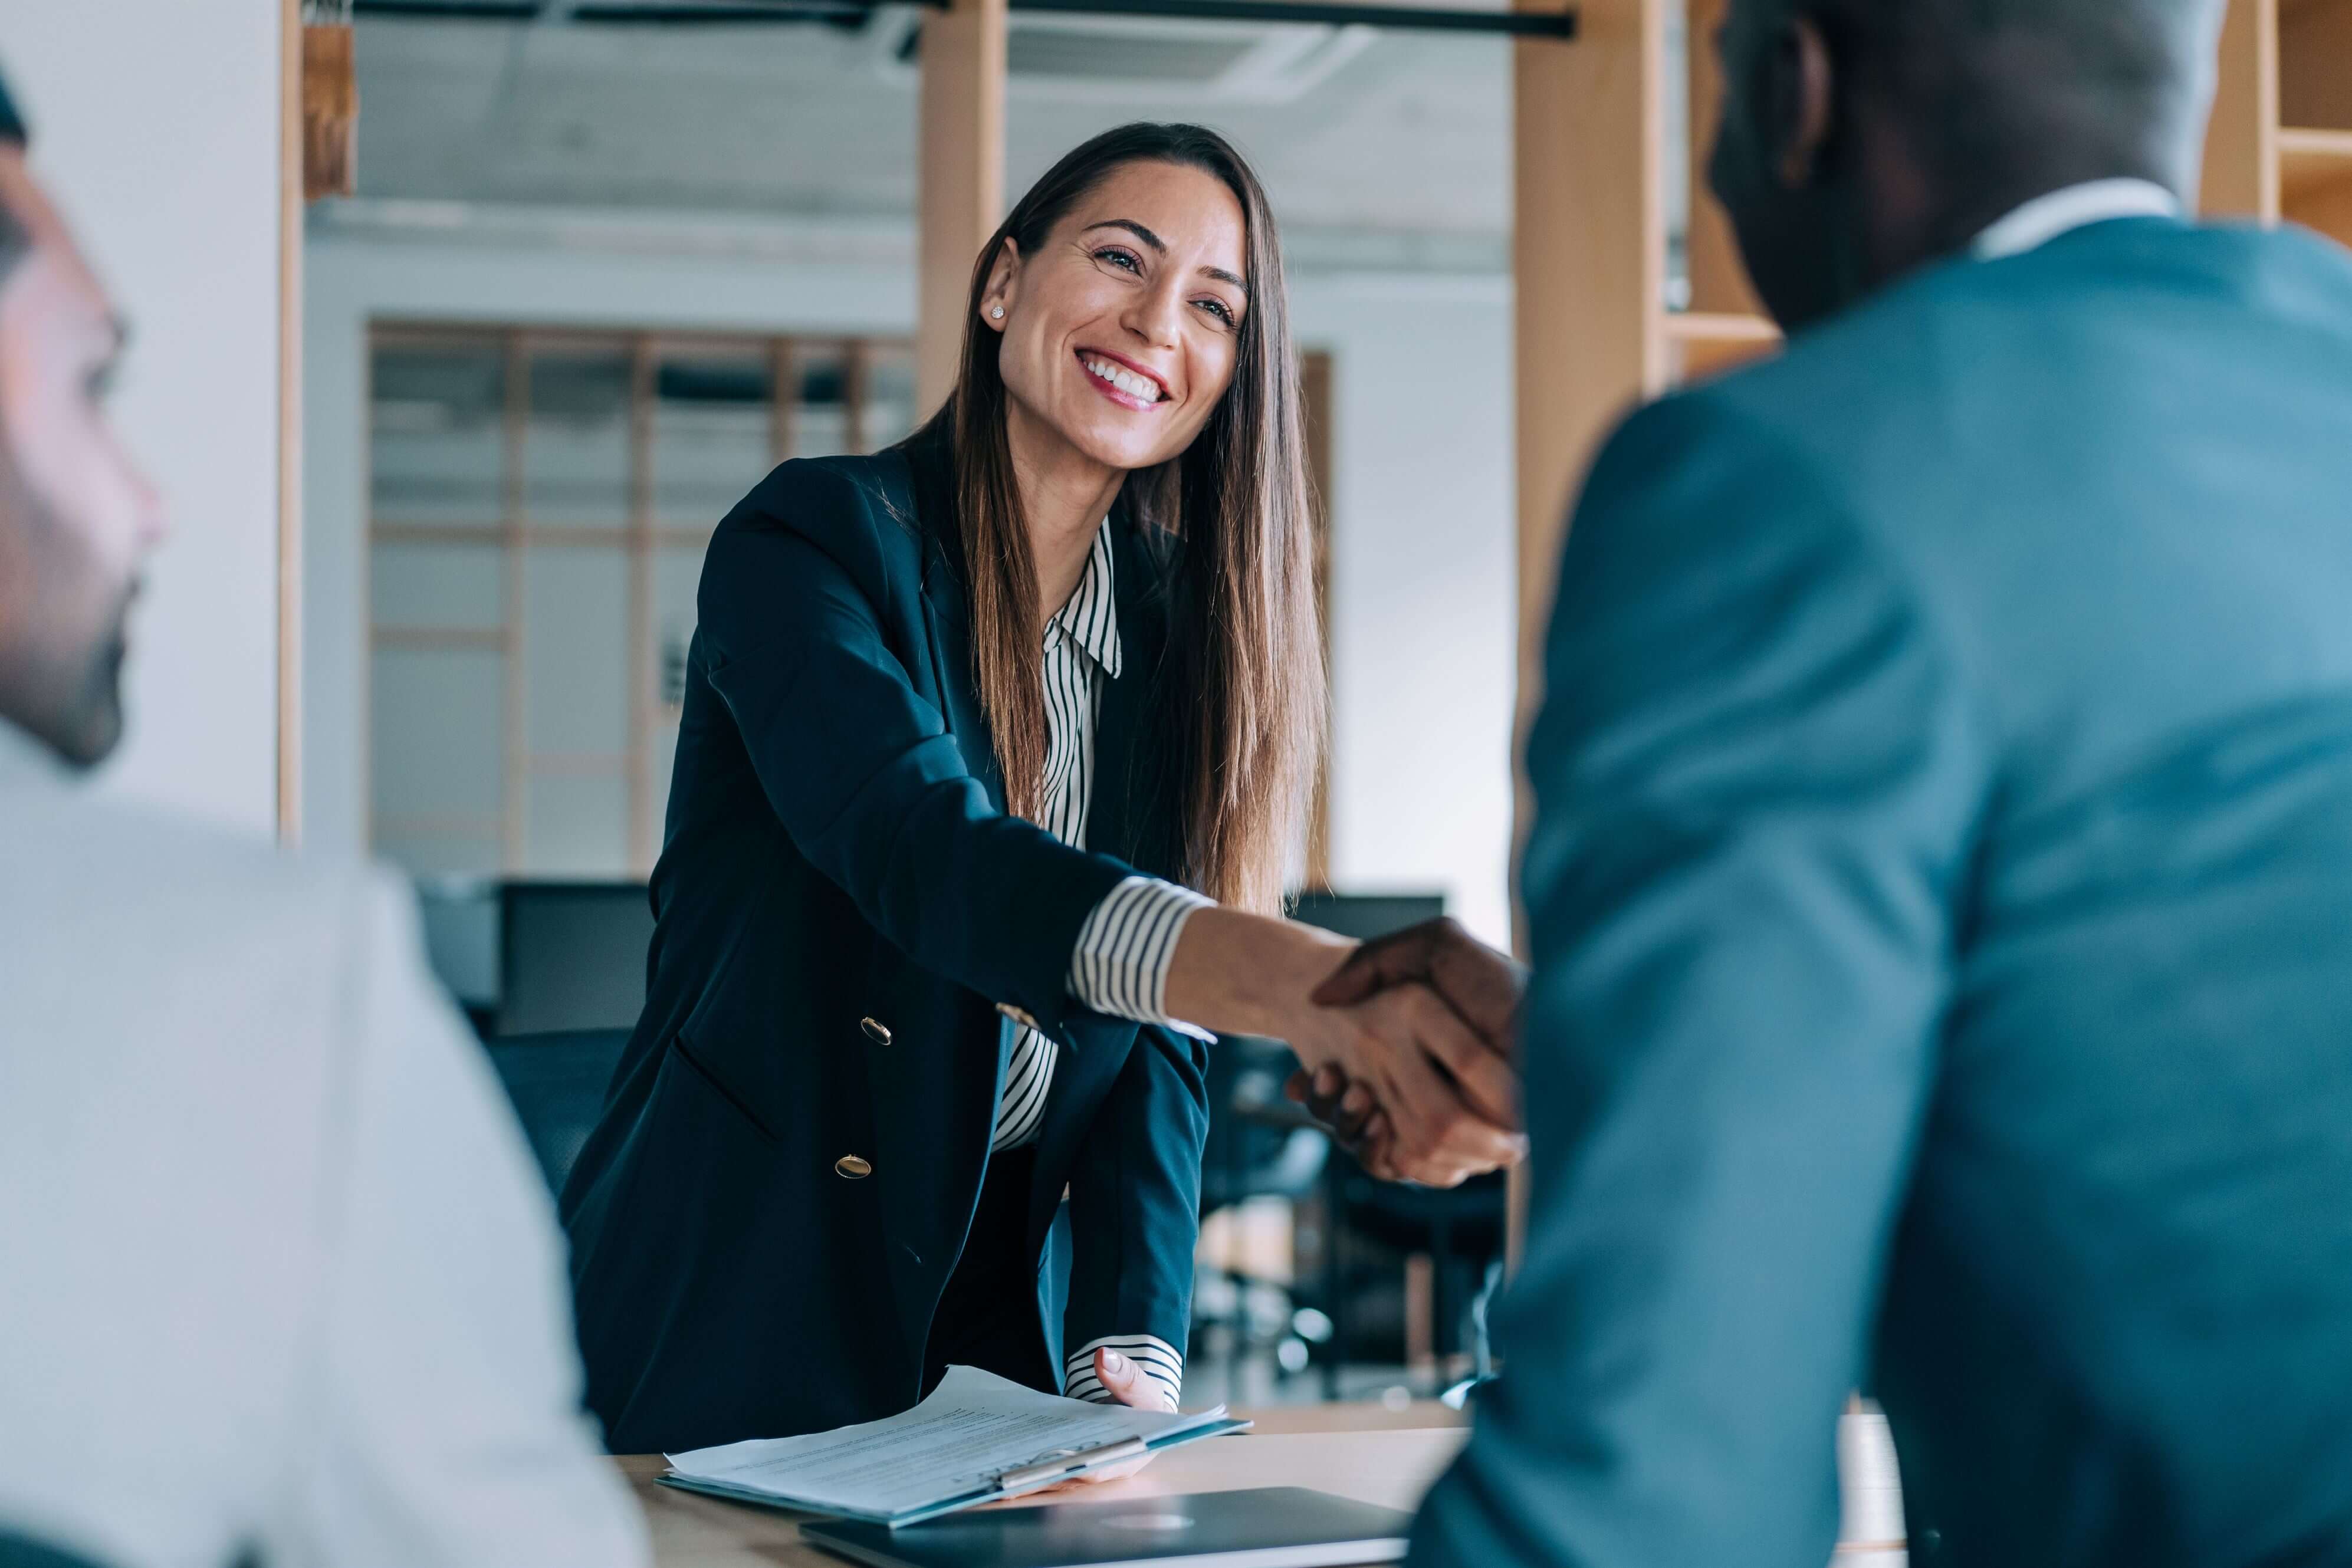 Two professionals in a workplace shaking hands firmly, reflecting a successful agreement or partnership.